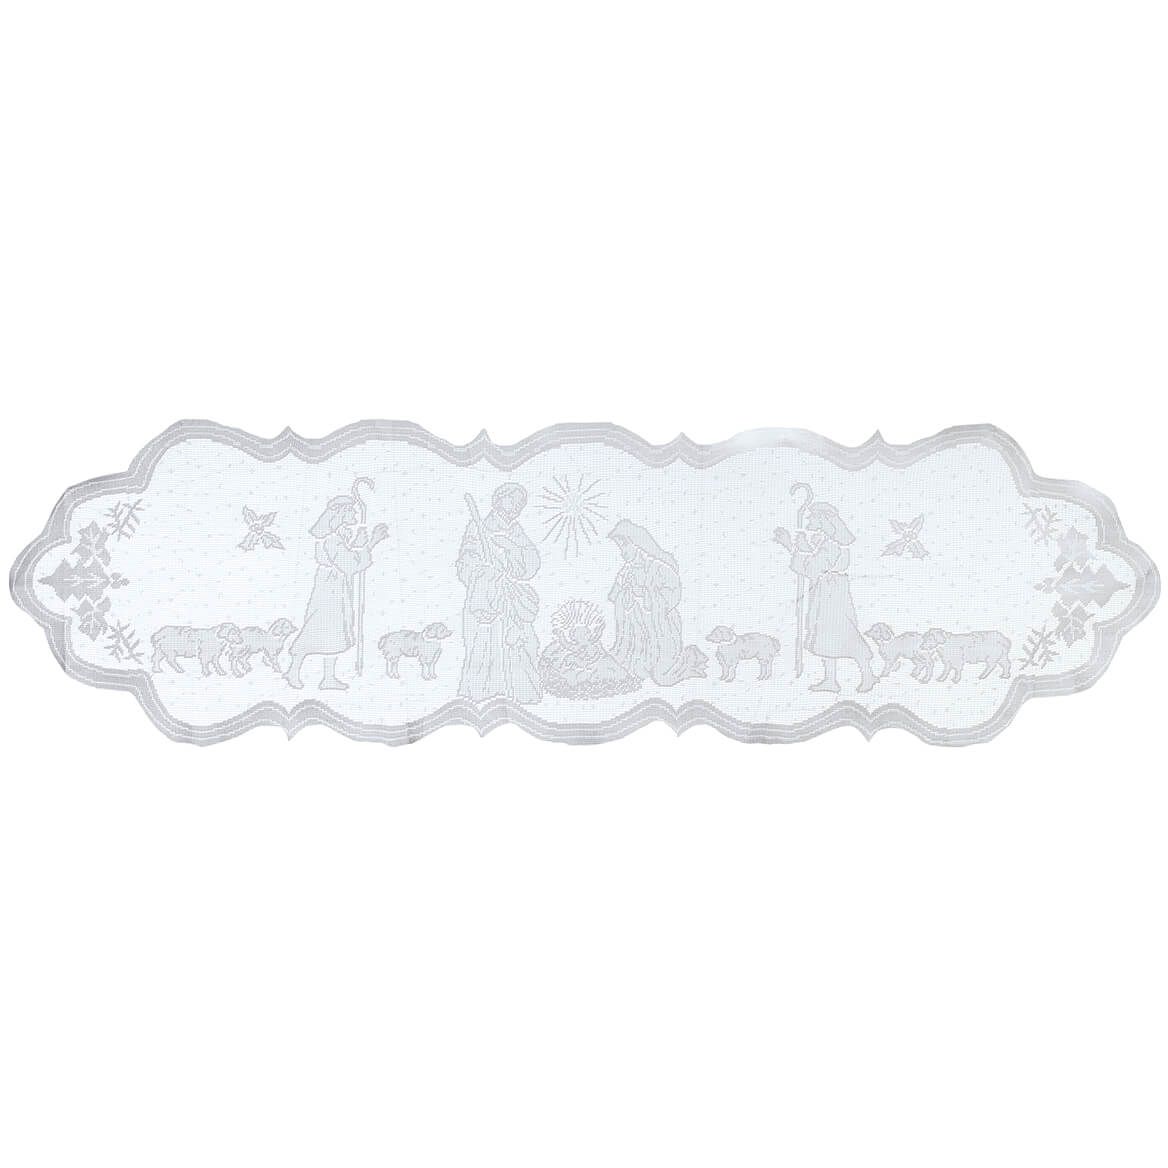 Silent Night Lace Table Runner + '-' + 372363